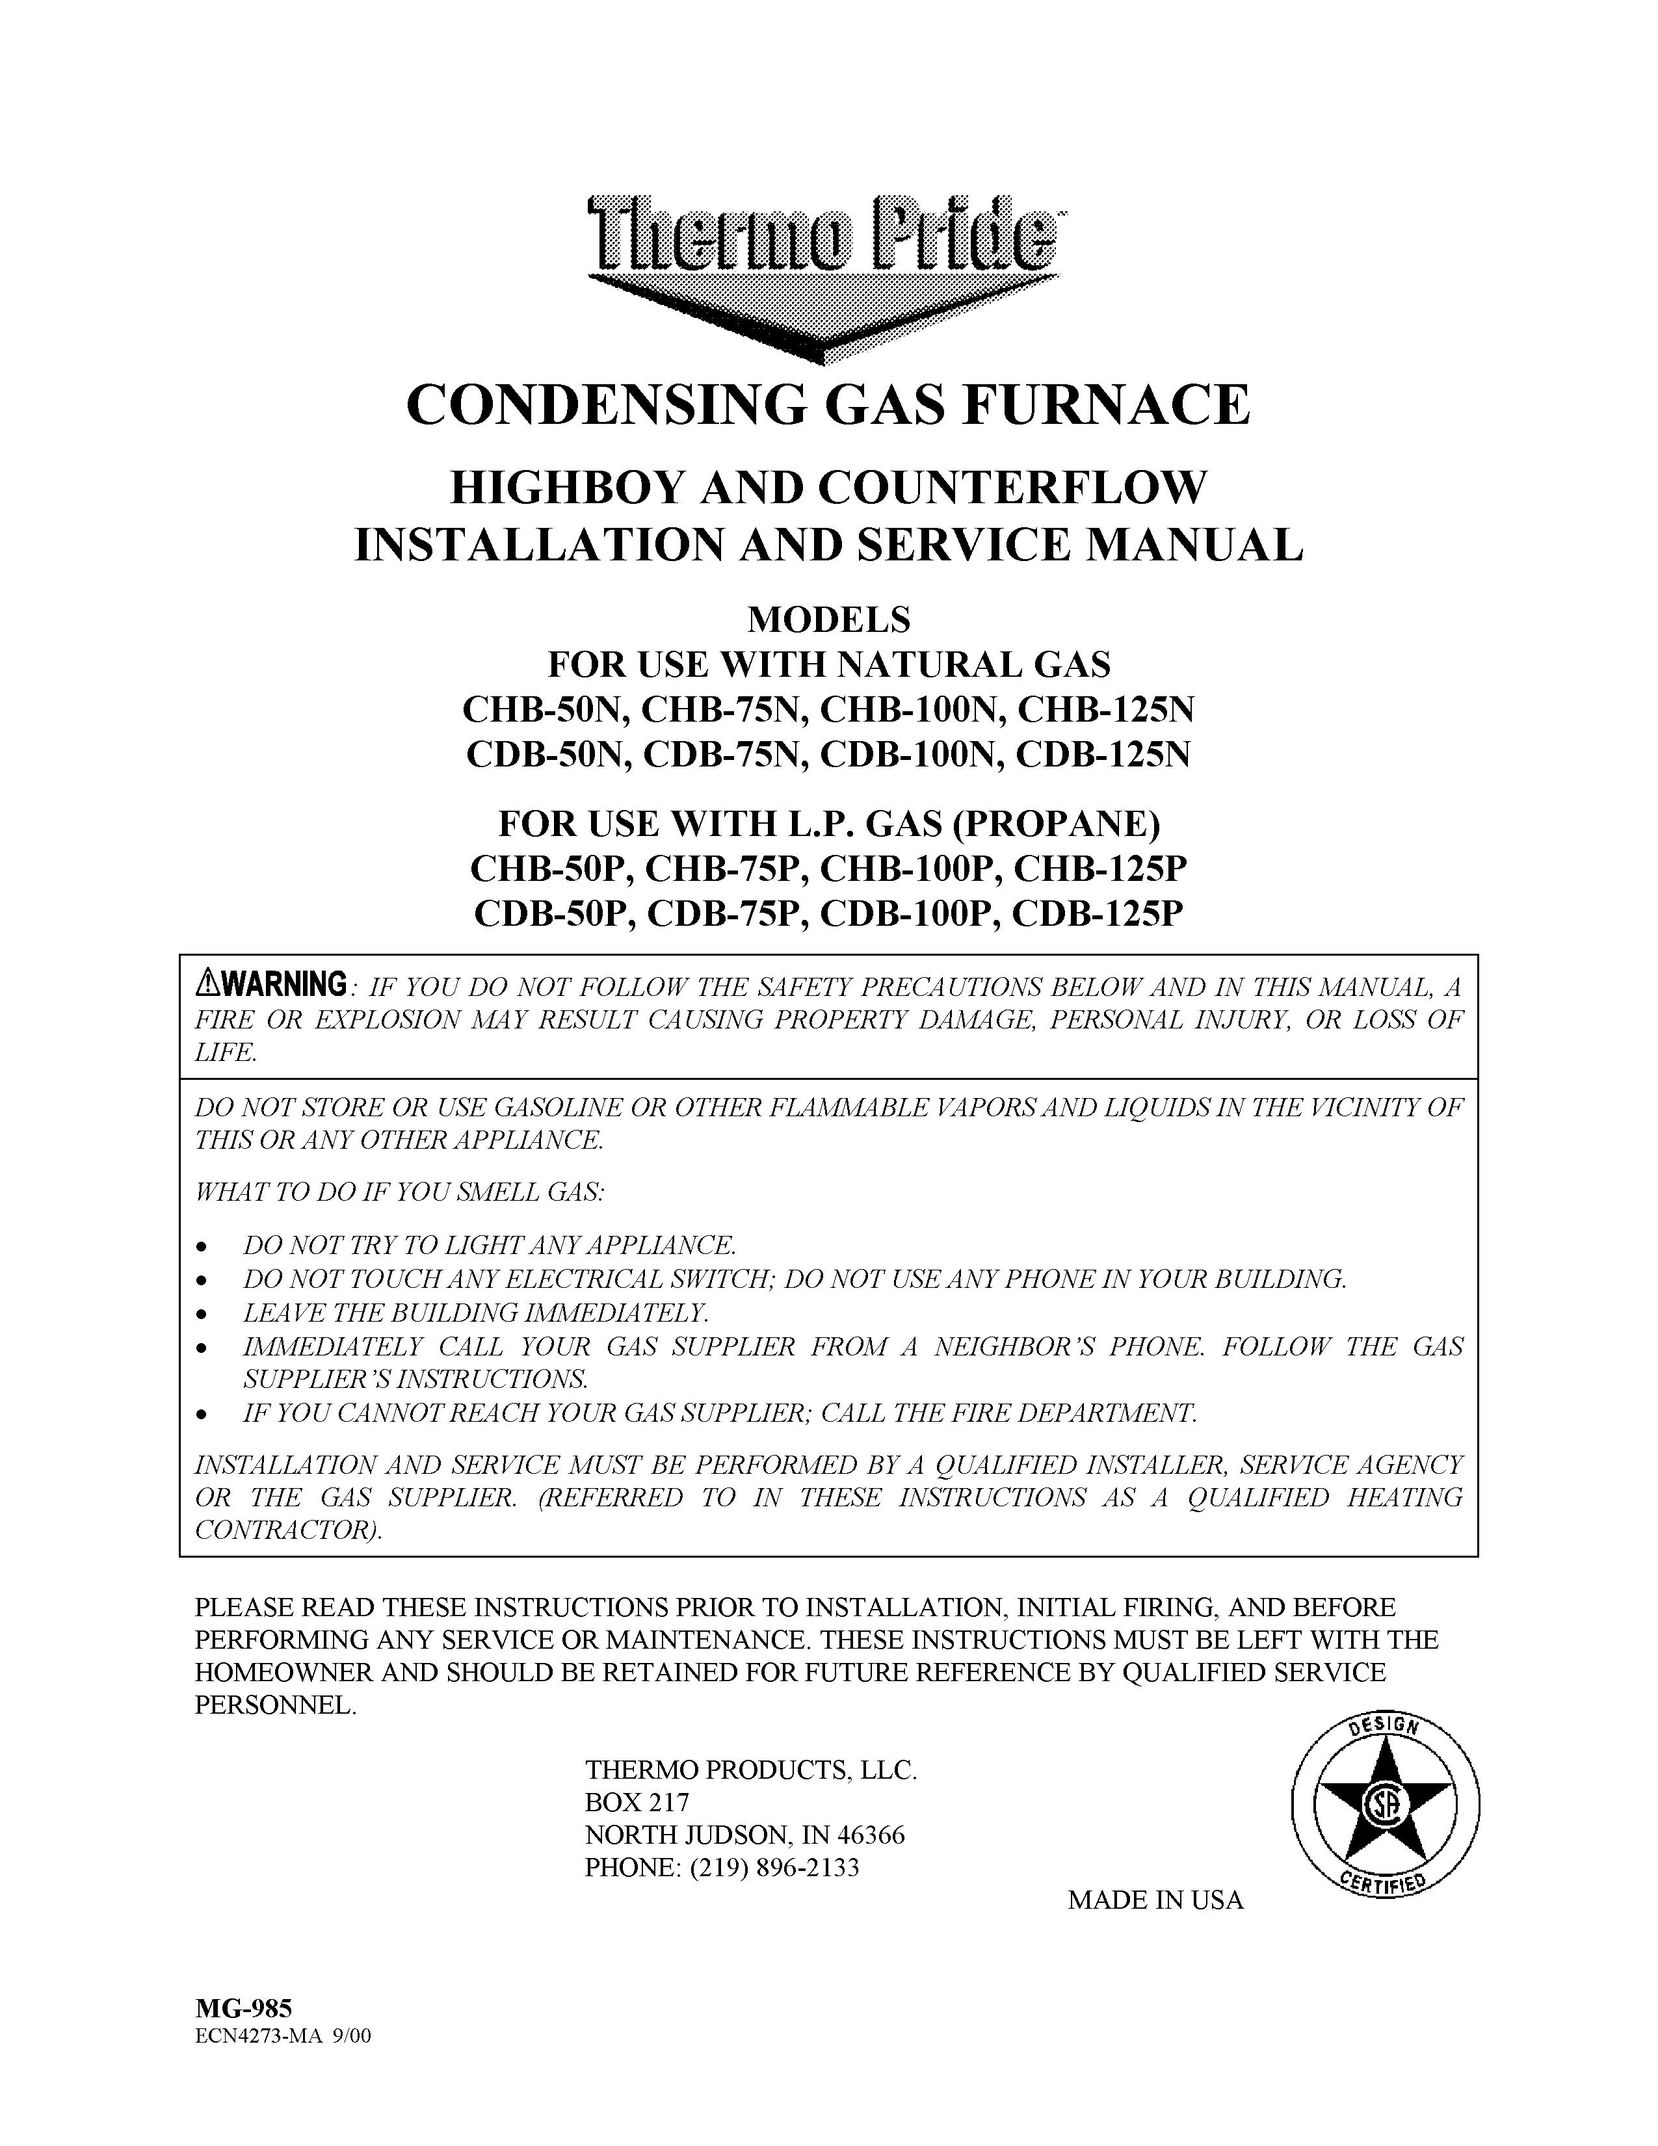 Thermo Products CHB-125N Furnace User Manual